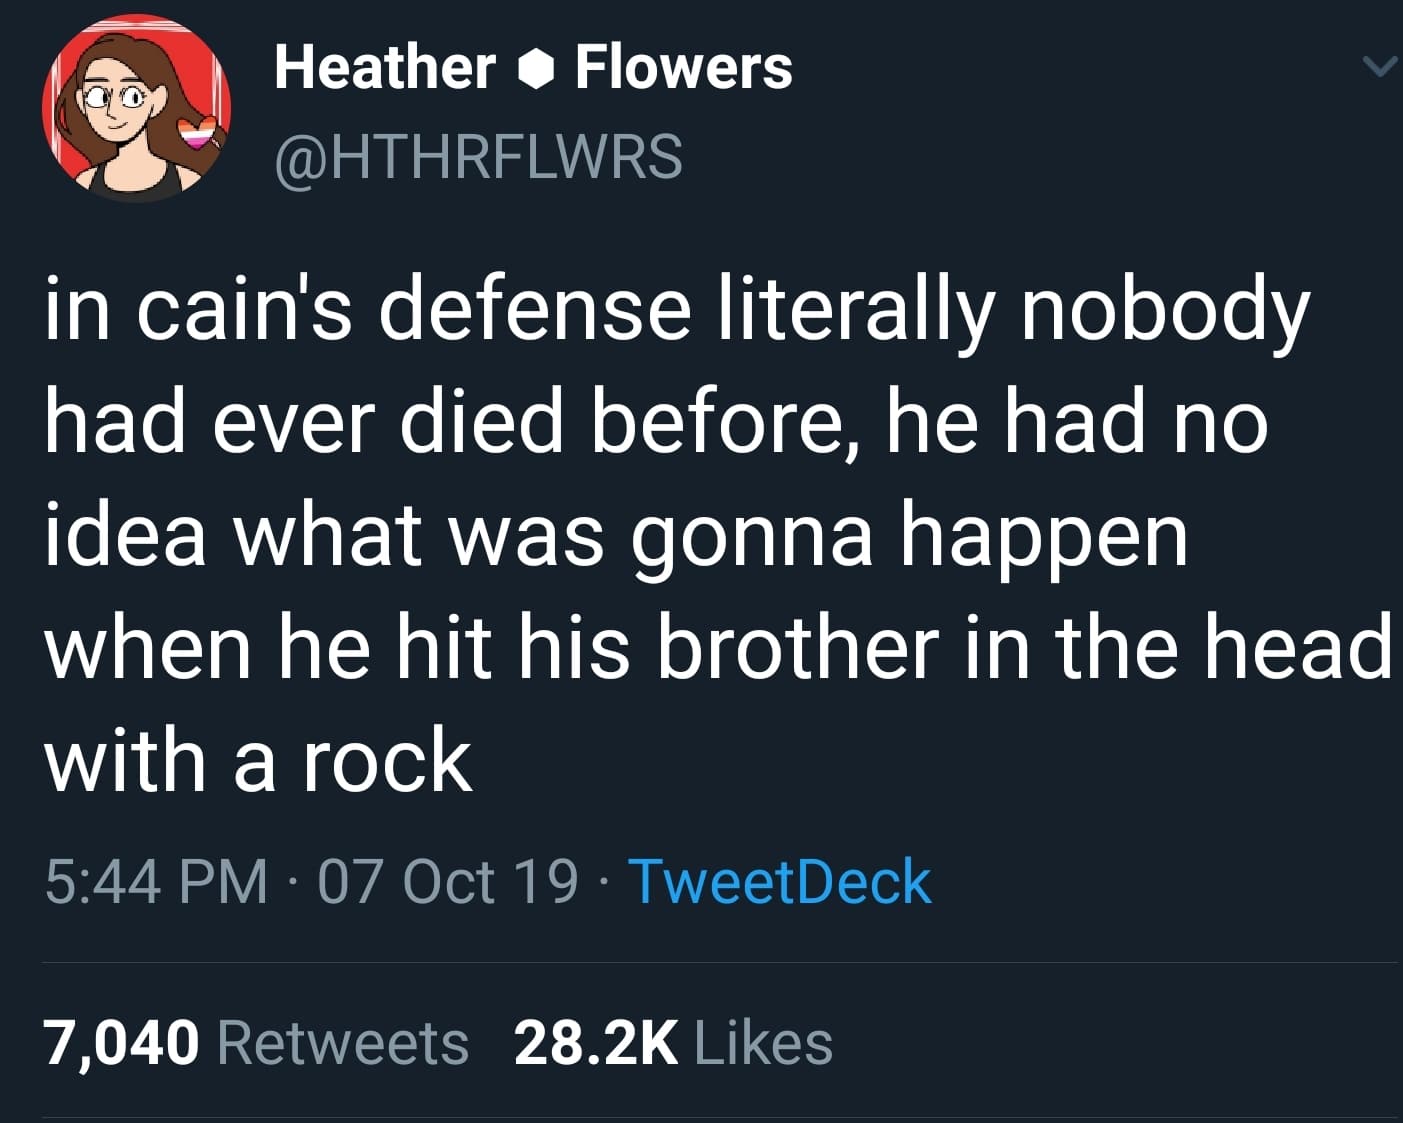 christian christian-memes christian text: Heather Flowers @HTHRFLWRS in cain's defense literally nobody had ever died before, he had no idea what was gonna happen when he hit his brother in the head with a rock 5:44 PM • 07 Oct 19 • TweetDeck Likes 7,040 28.2K Retweets 